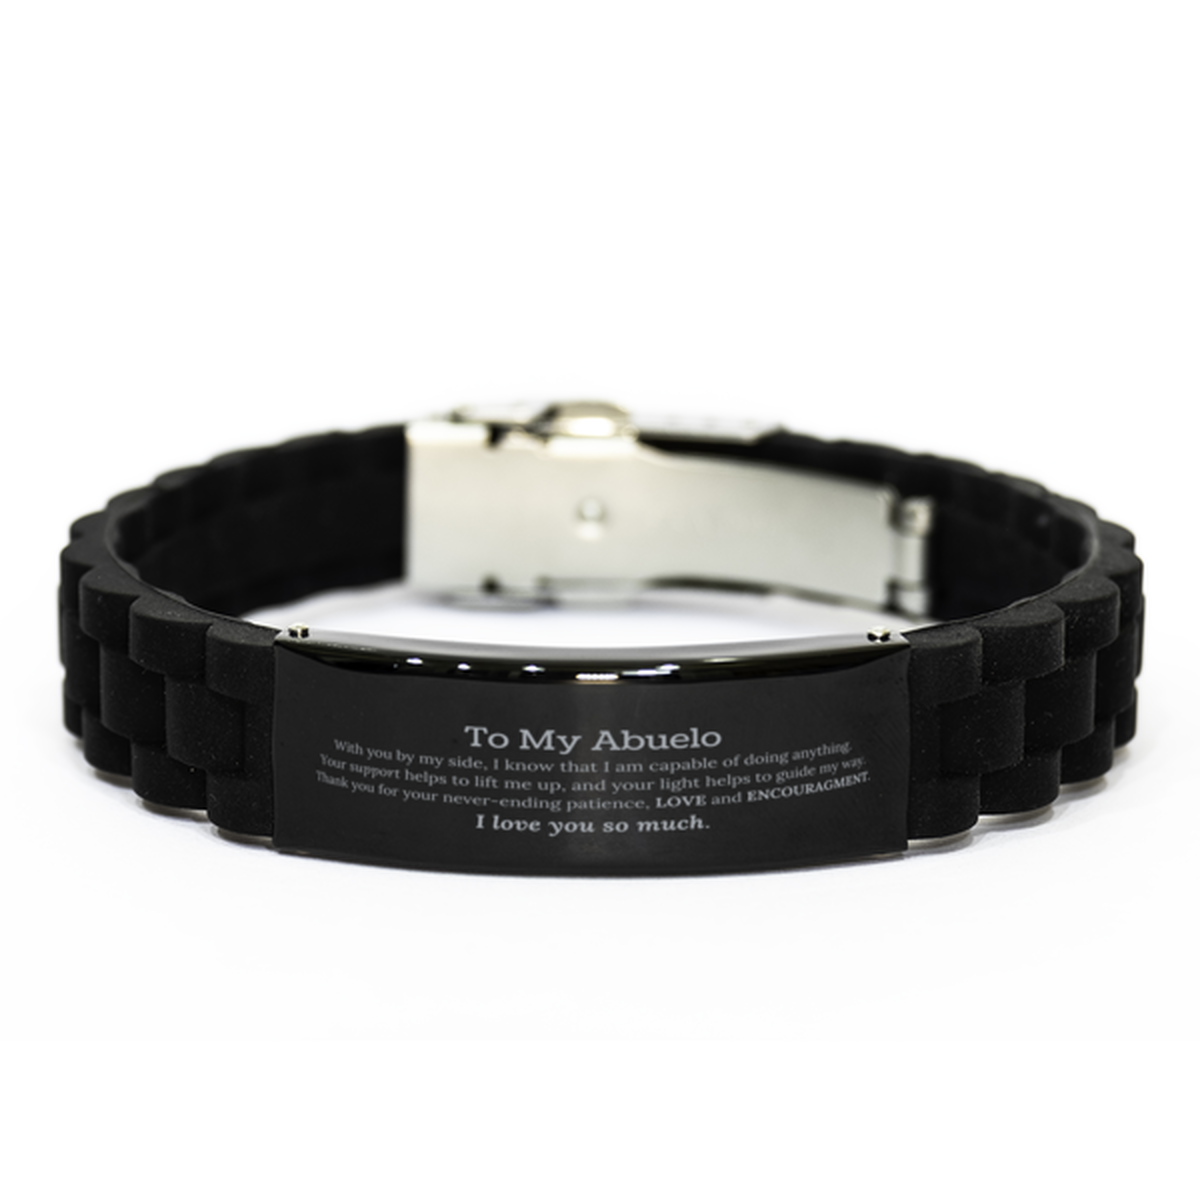 Appreciation Abuelo Black Glidelock Clasp Bracelet Gifts, To My Abuelo Birthday Christmas Wedding Keepsake Gifts for Abuelo With you by my side, I know that I am capable of doing anything. I love you so much